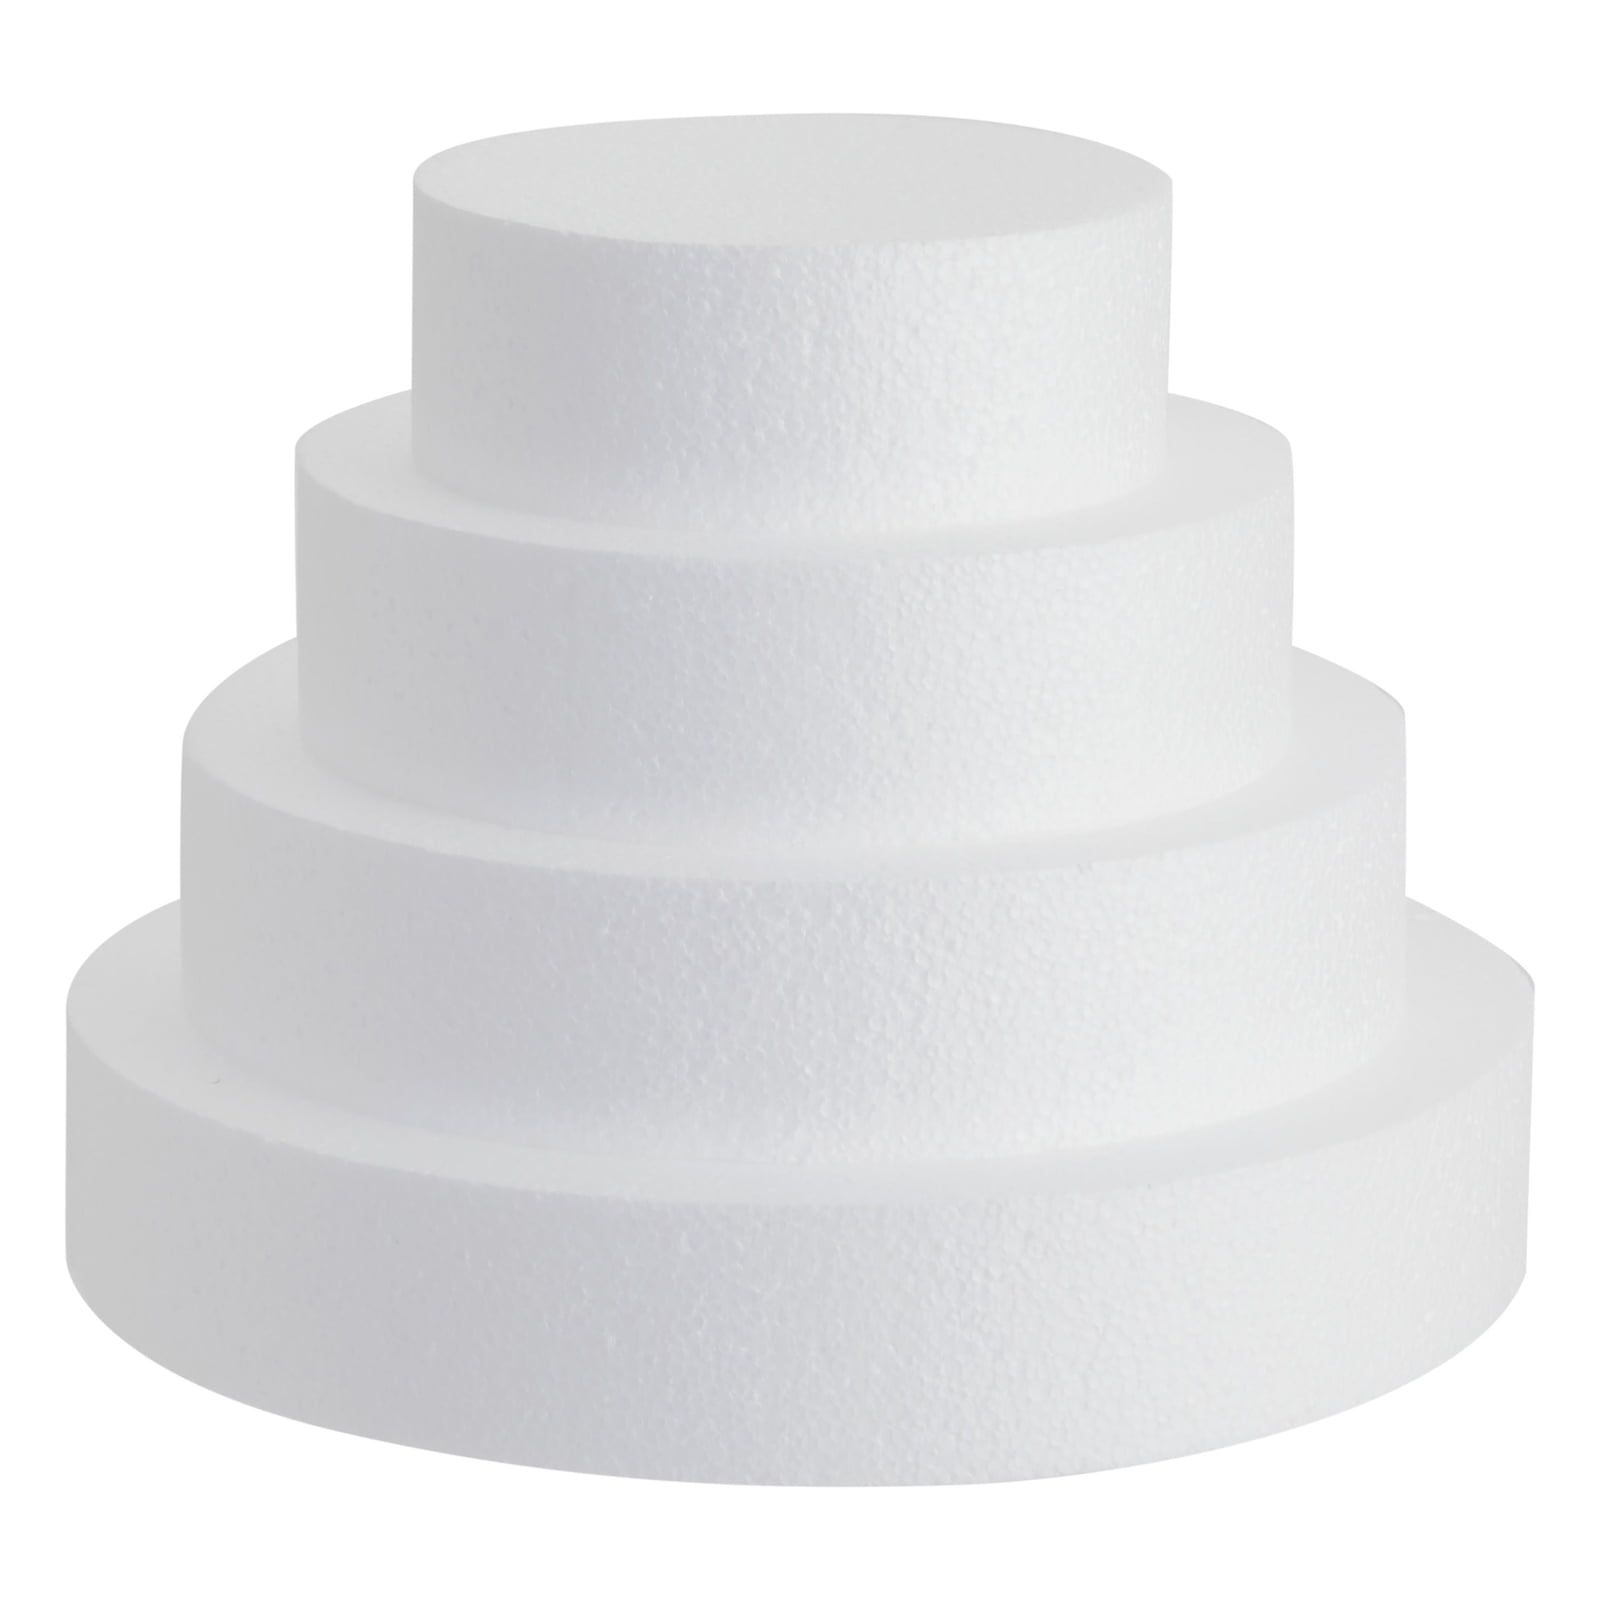 5 Off] Order 'Pearls & Roses Tiered Classic Wedding Cake (4-Tier)' Online |  Urgent Delivery Across London // Sugaholics™